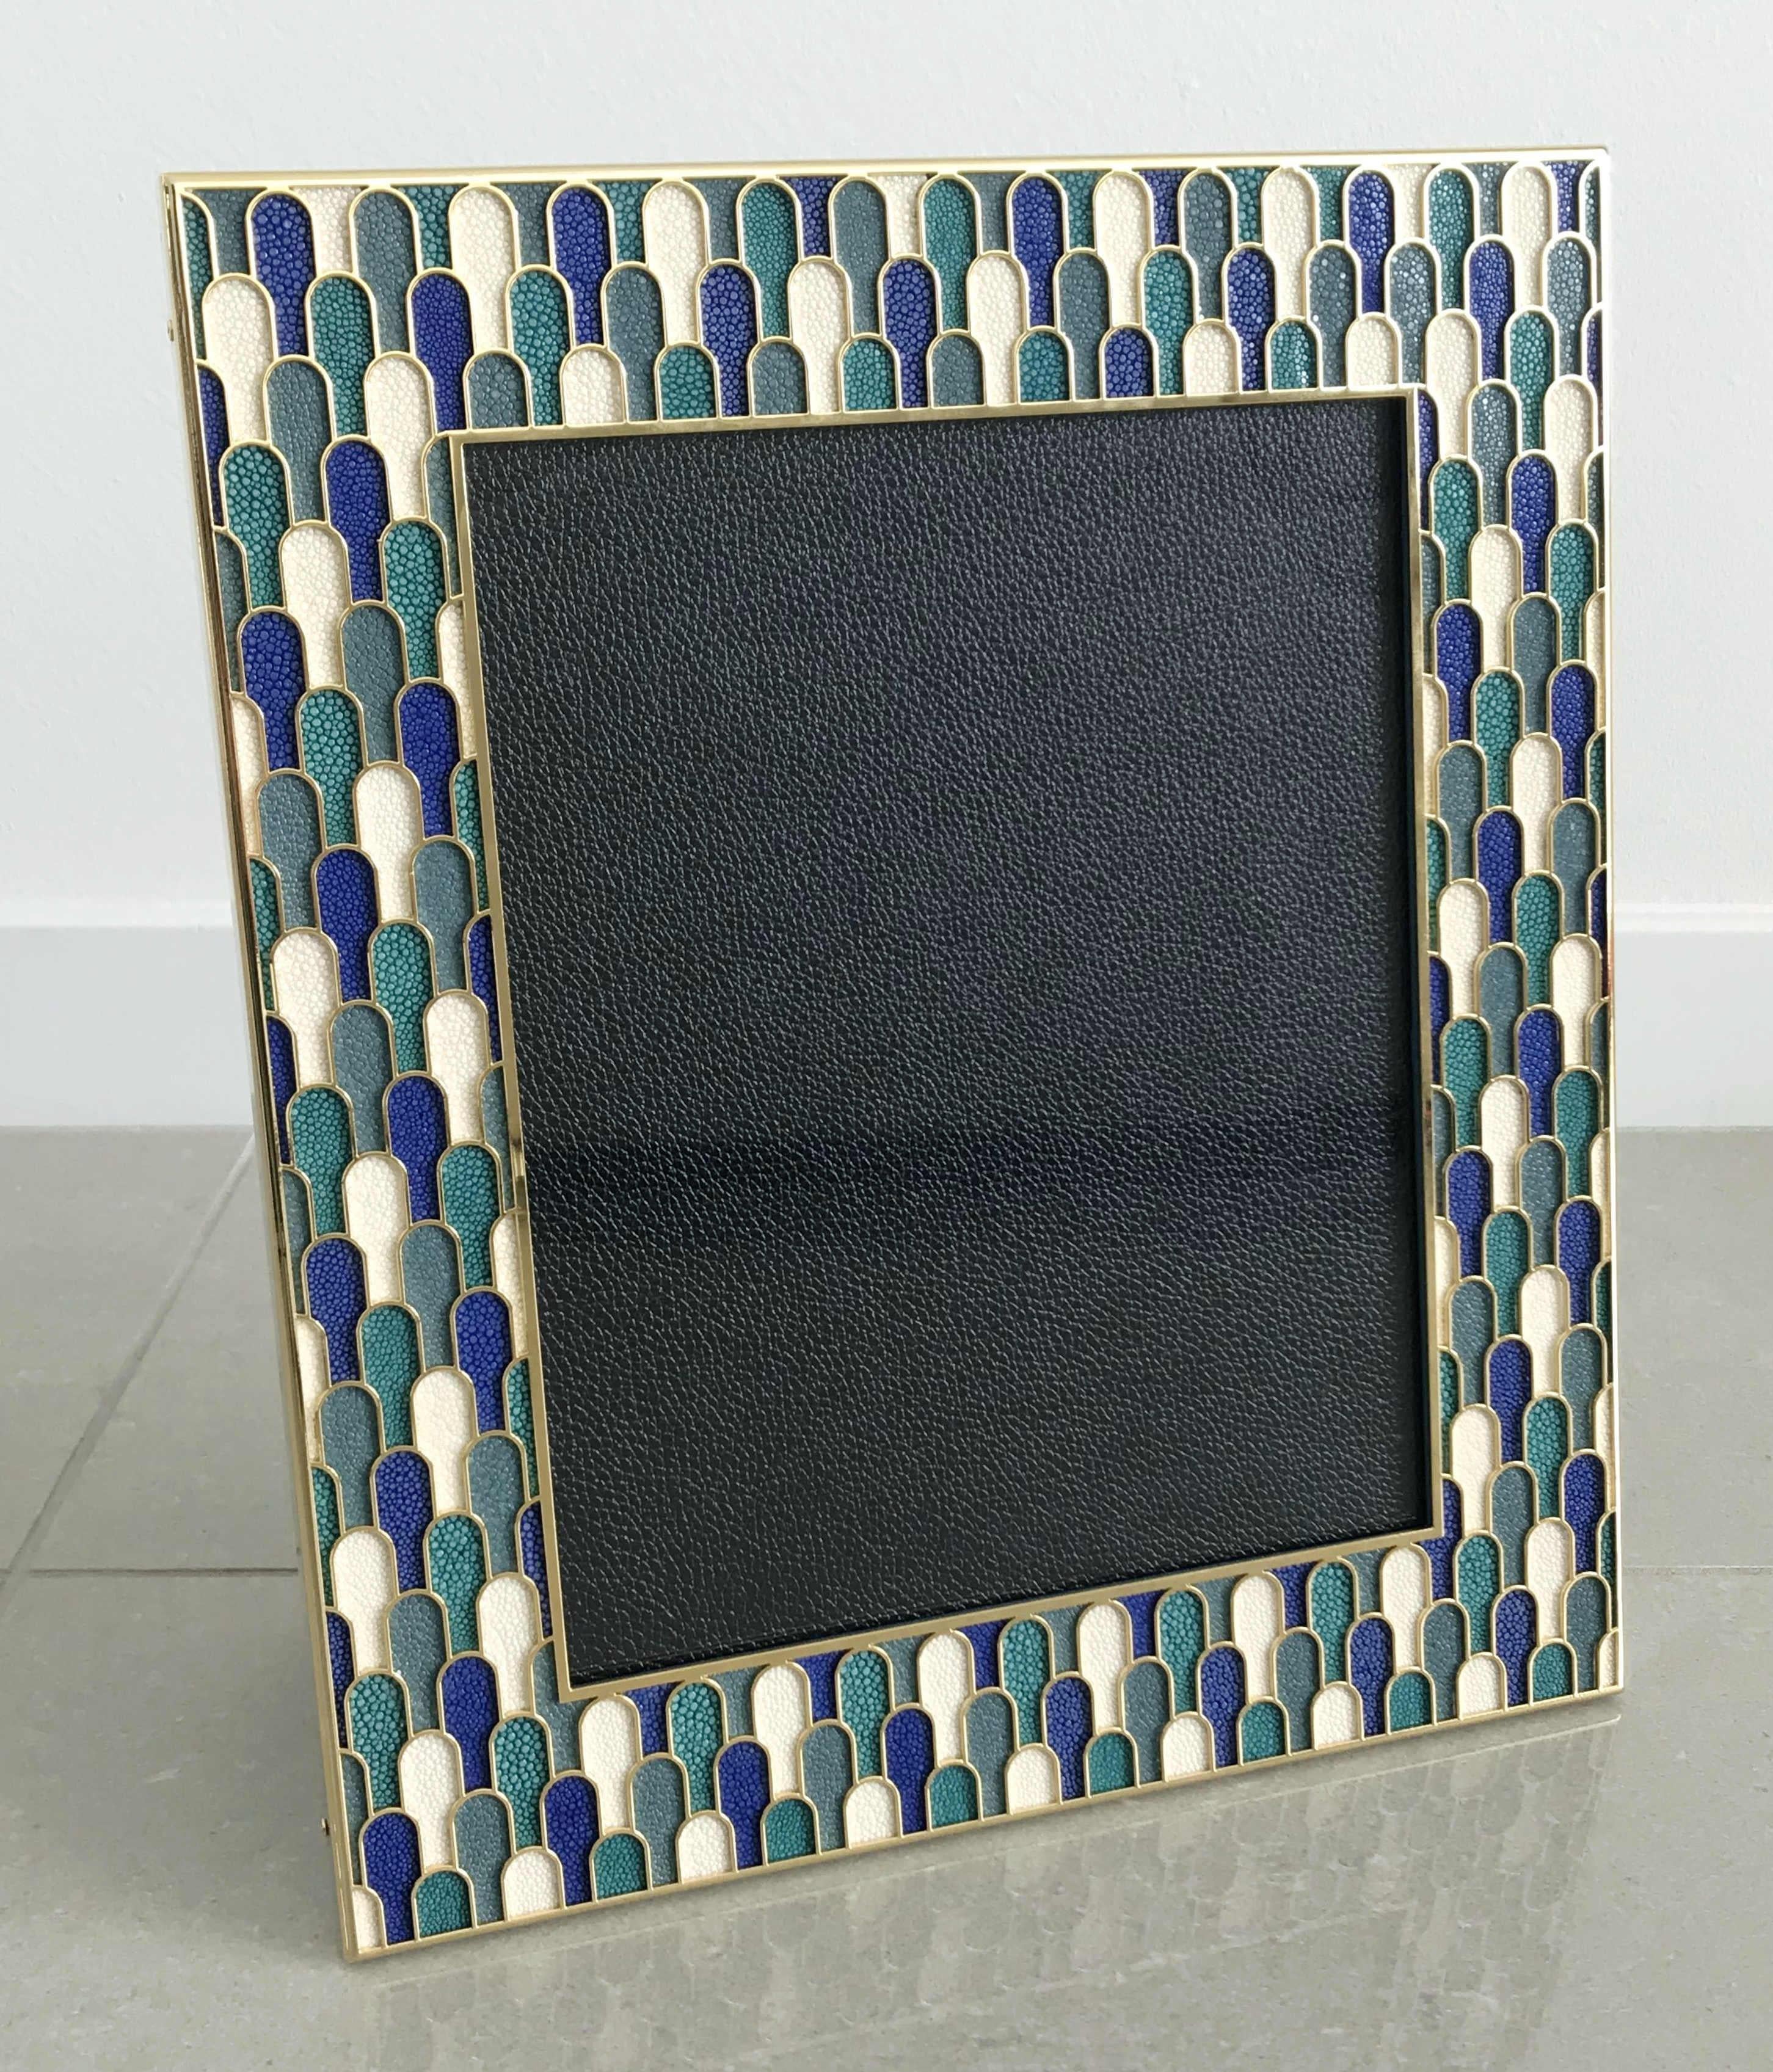 Multi-color shagreen leather and 24-karat gold-plated picture frame by Fabio Ltd
Measures: Height 13.5 inches, width 11.5 inches, depth 1 inch
Photo size: 8 inches by 10 inches
LAST 1 in stock in Palm Springs ON 50% OFF SALE for $749 !!!
Order